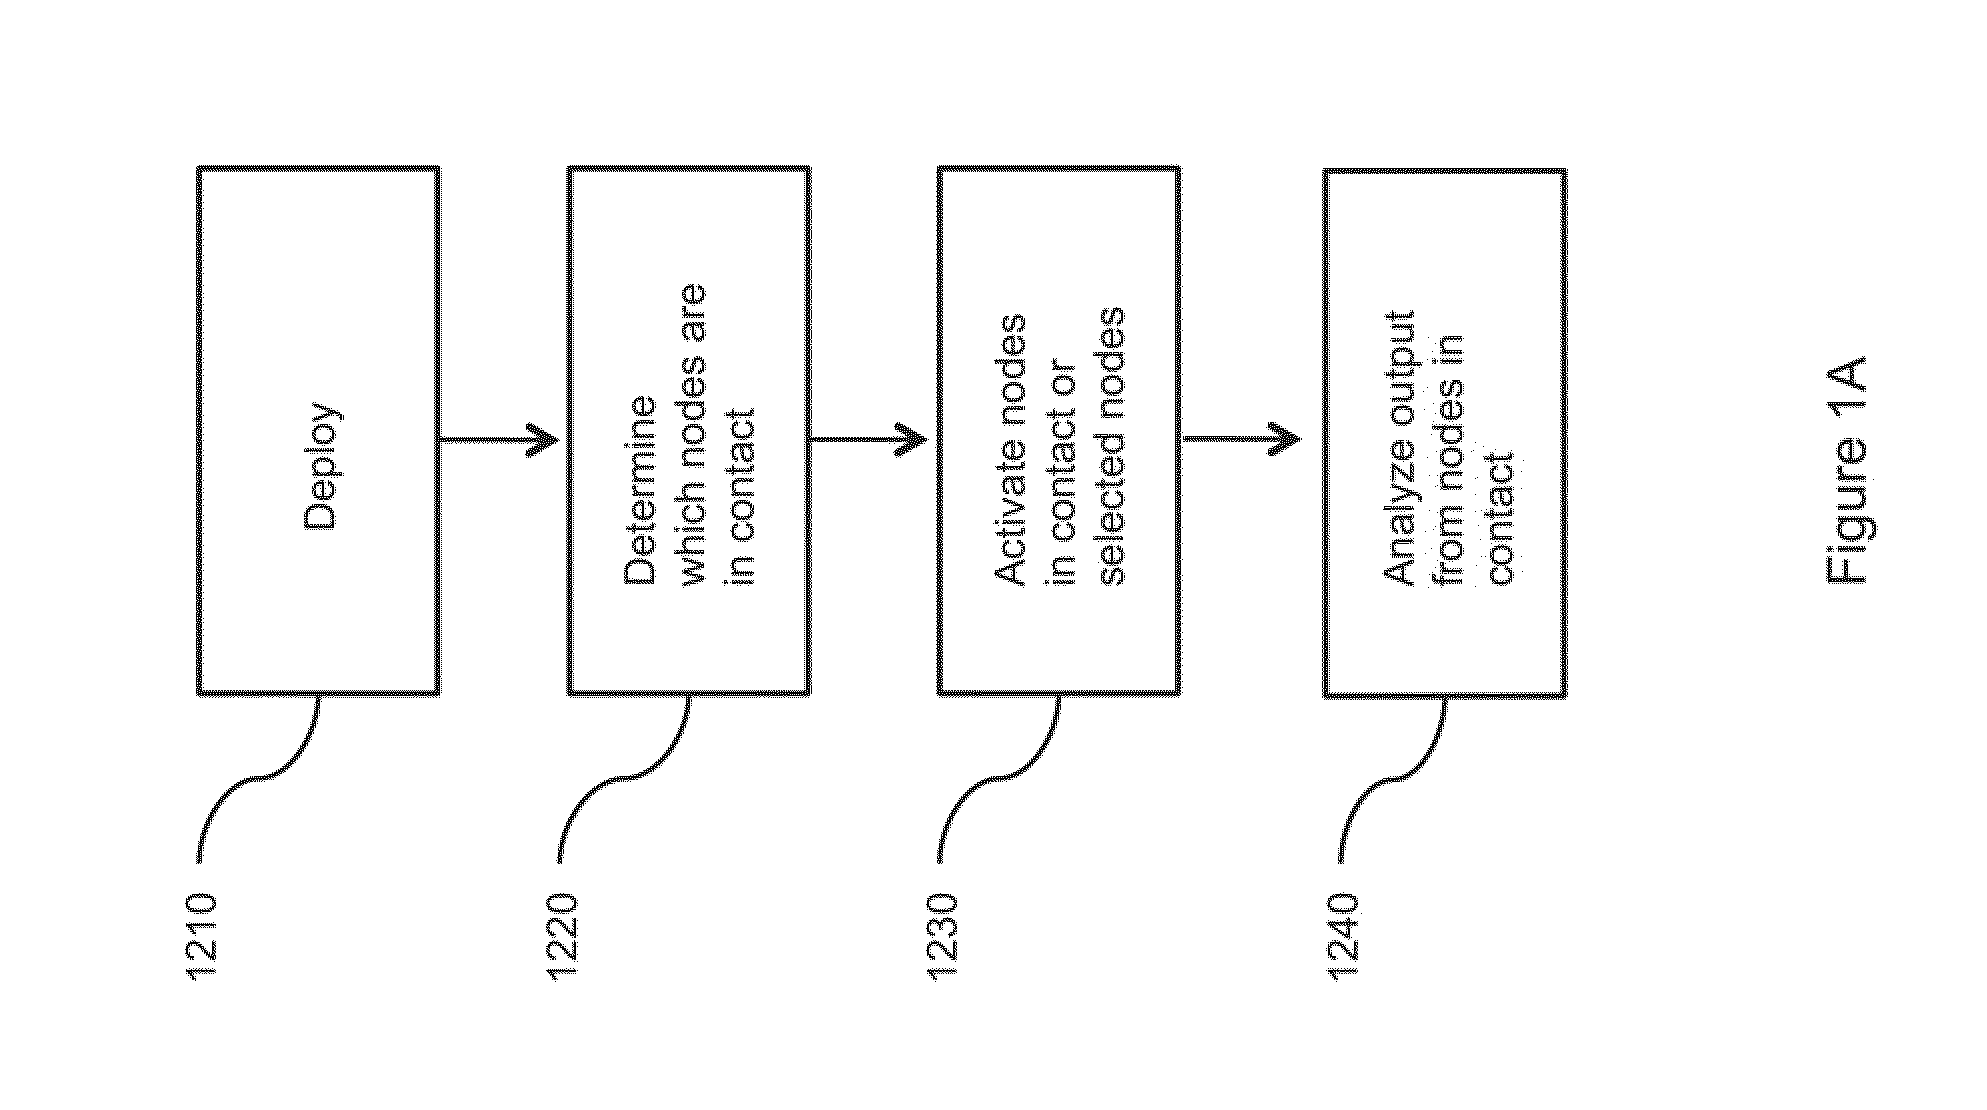 Systems,methods, and devices having stretchable integrated circuitry for sensing and delivering therapy